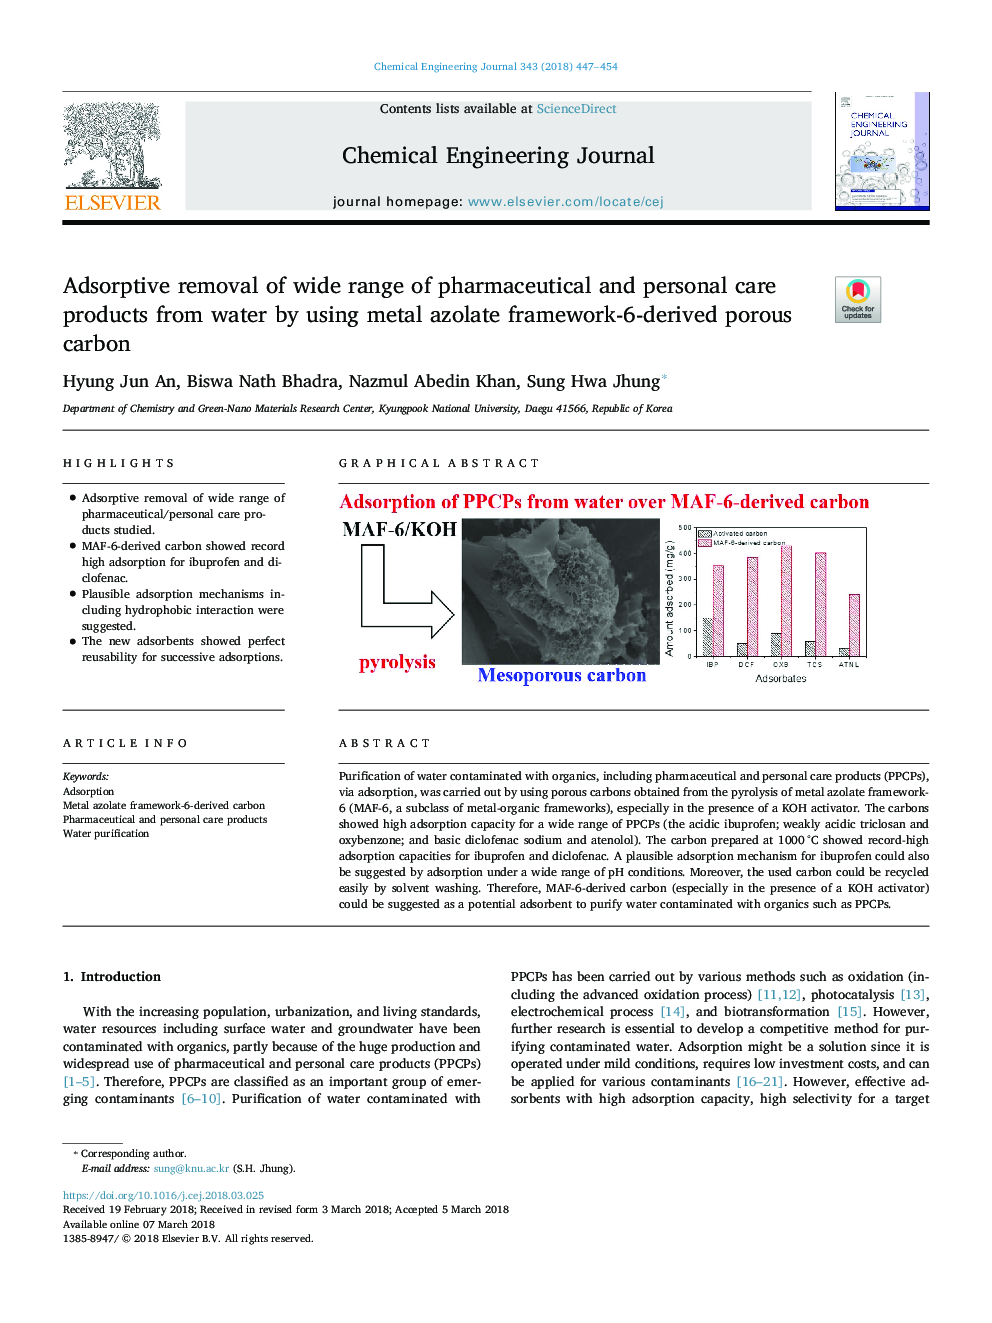 Adsorptive removal of wide range of pharmaceutical and personal care products from water by using metal azolate framework-6-derived porous carbon